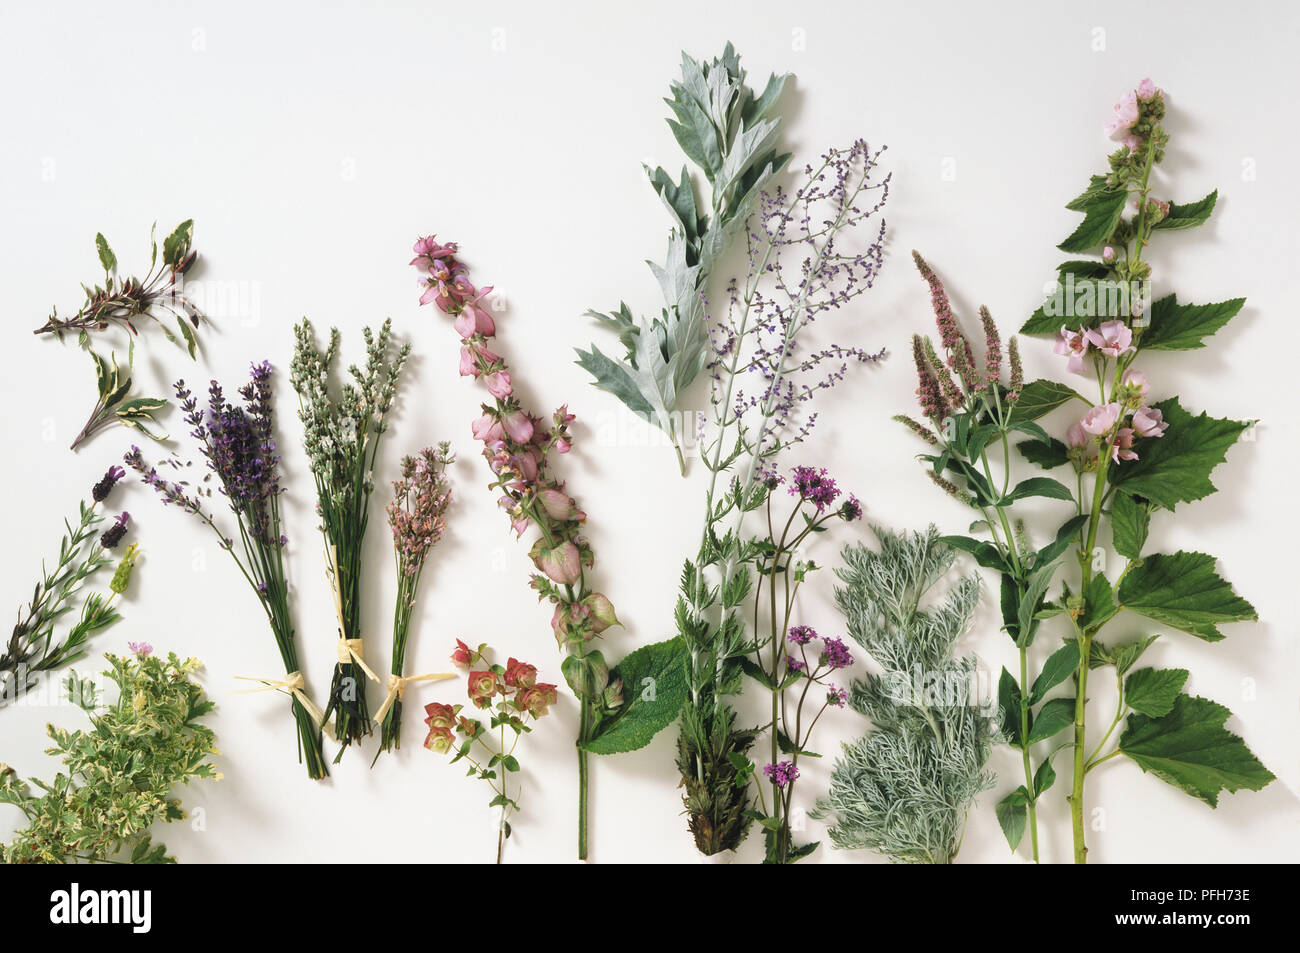 Selection of herb cuttings with flowers and leaves Stock Photo